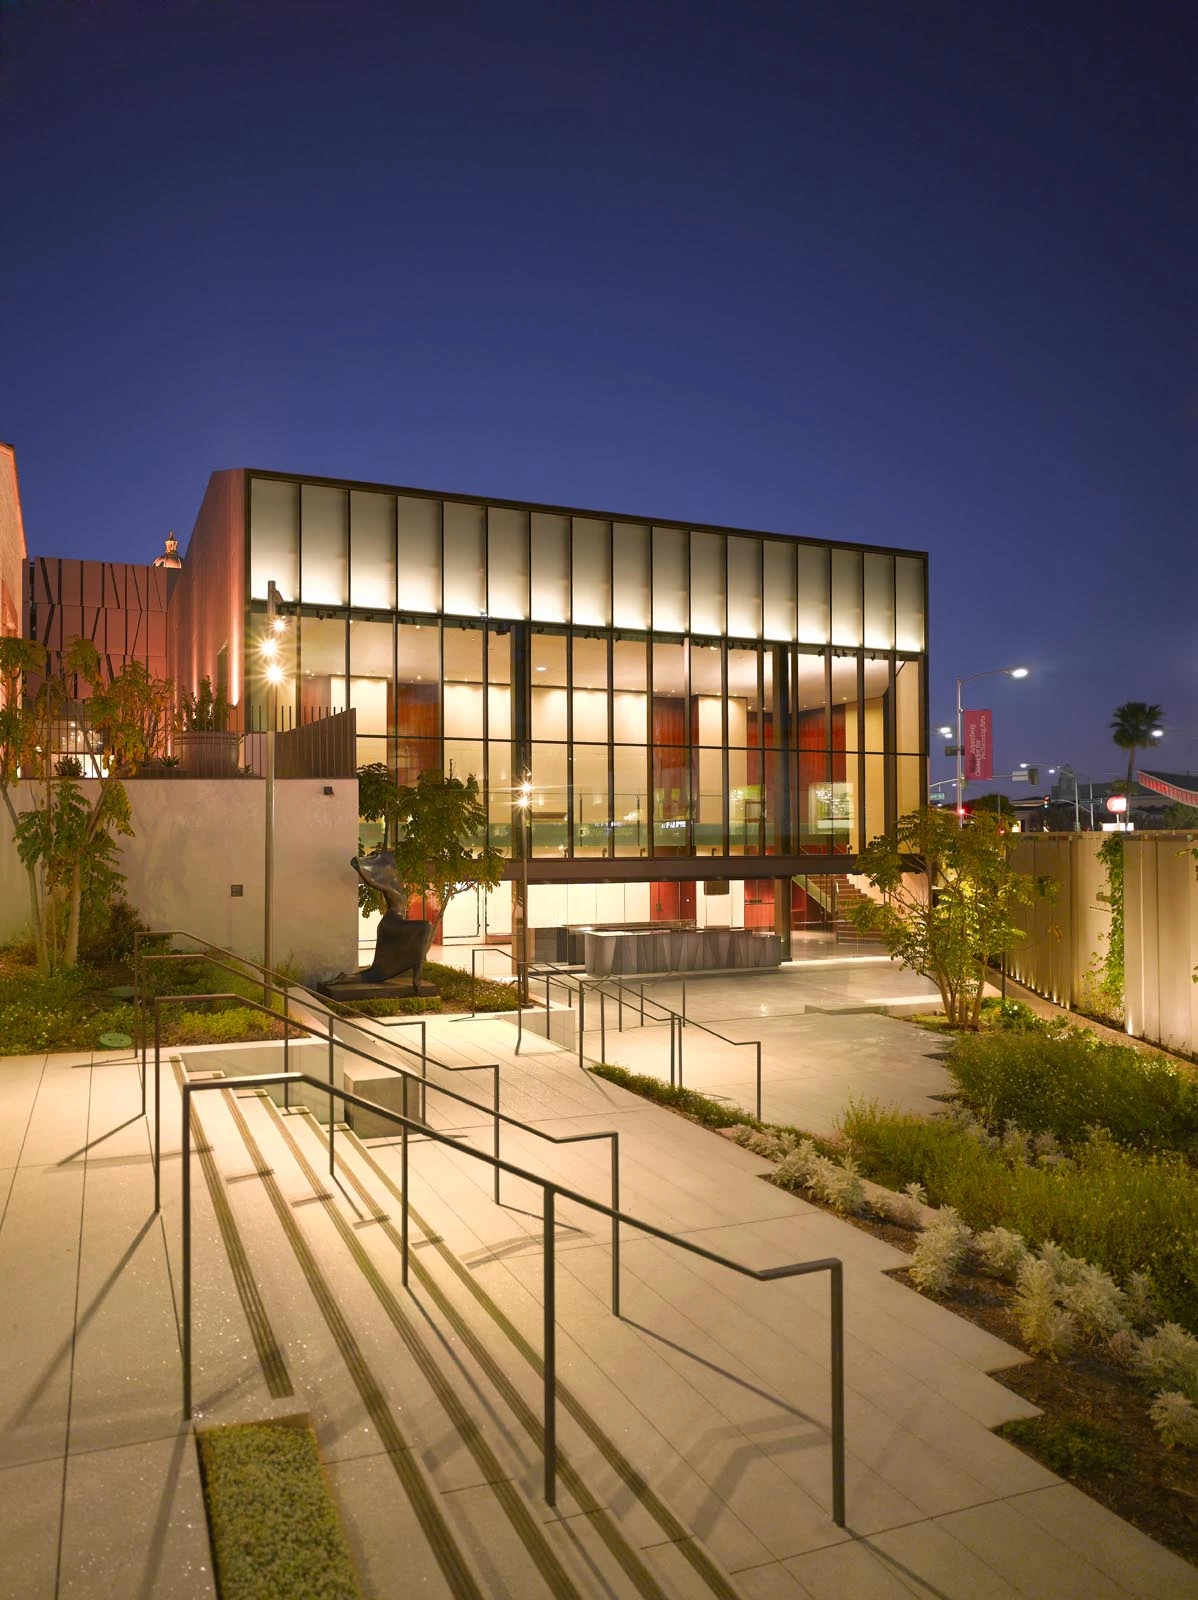 Wallis Annenberg Center for the Performing Arts, located in the heart of Beverly Hills, CA